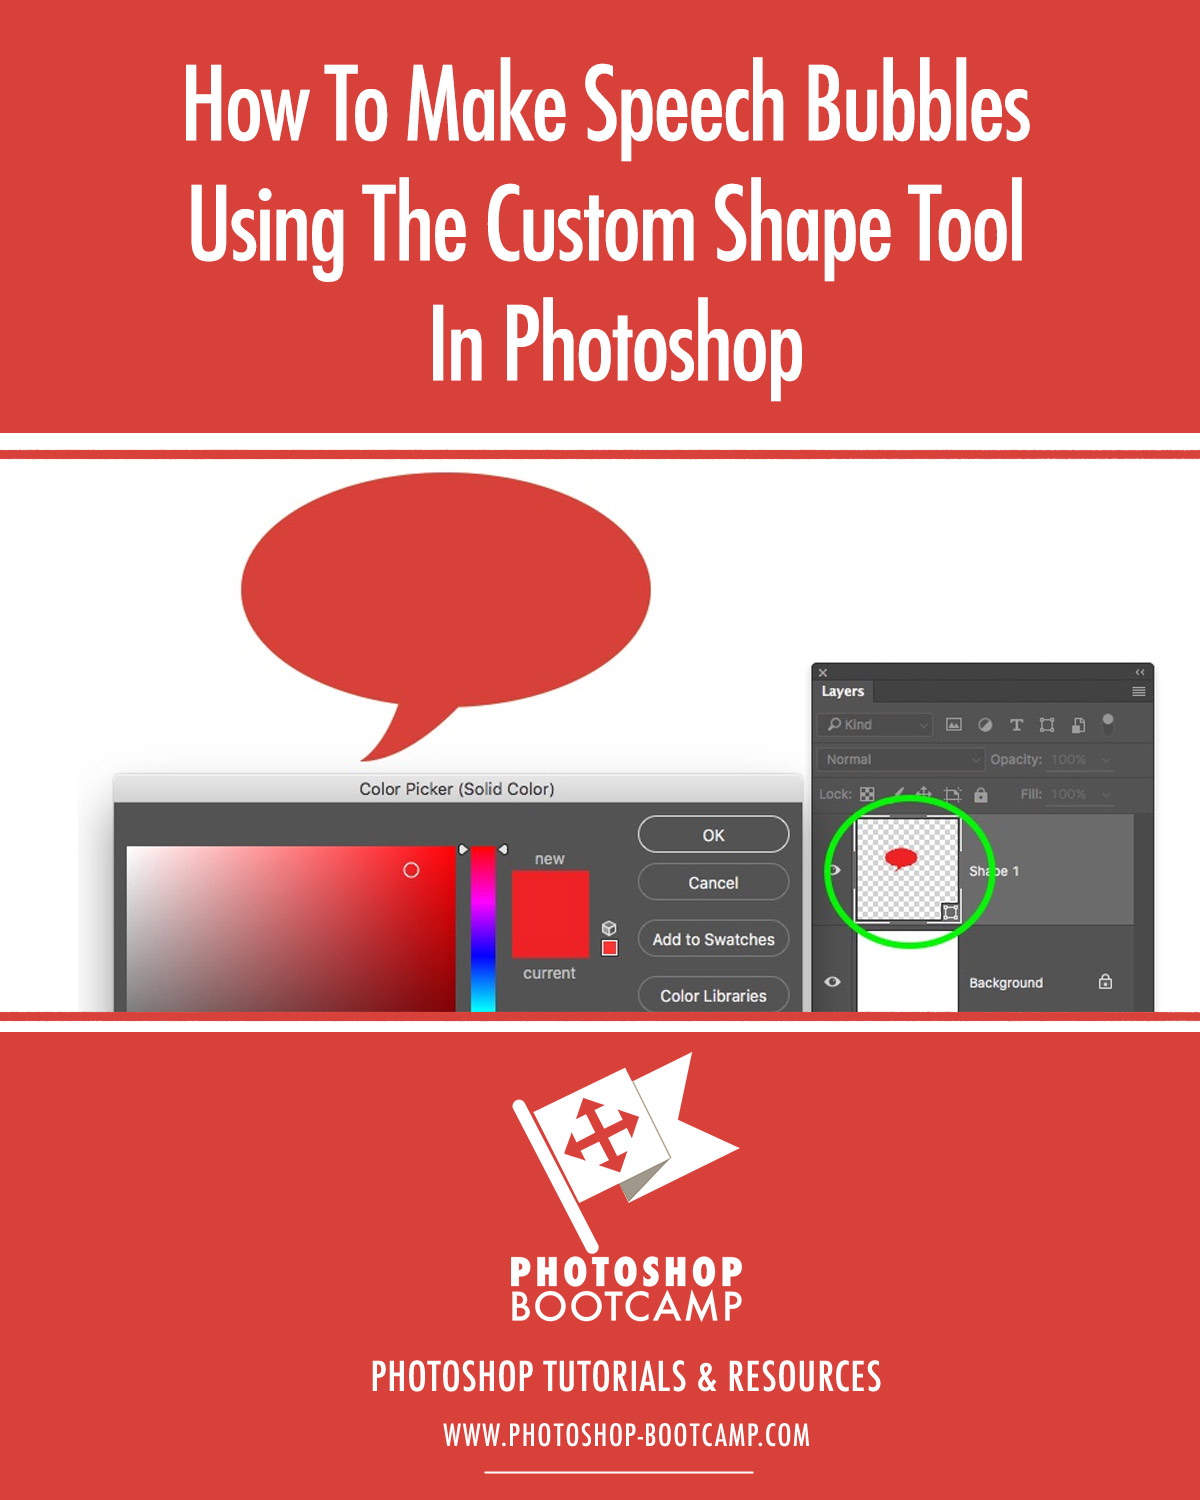 How To Make Speech Bubbles Using The Custom Shape Tool In Photoshop